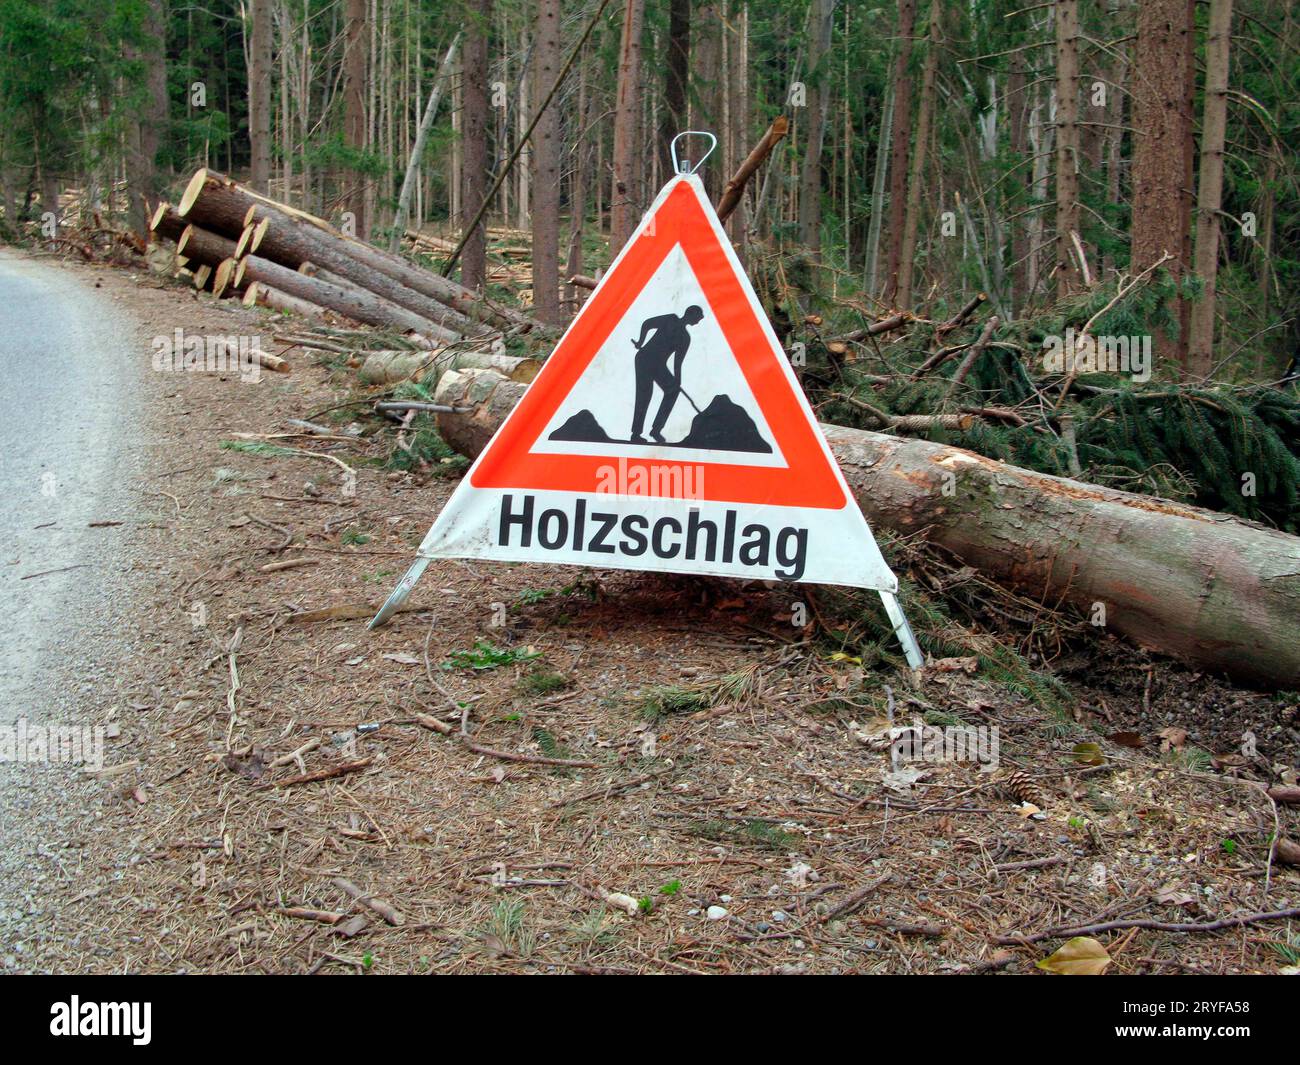 Restricted area sign during woodcutting and logging Stock Photo